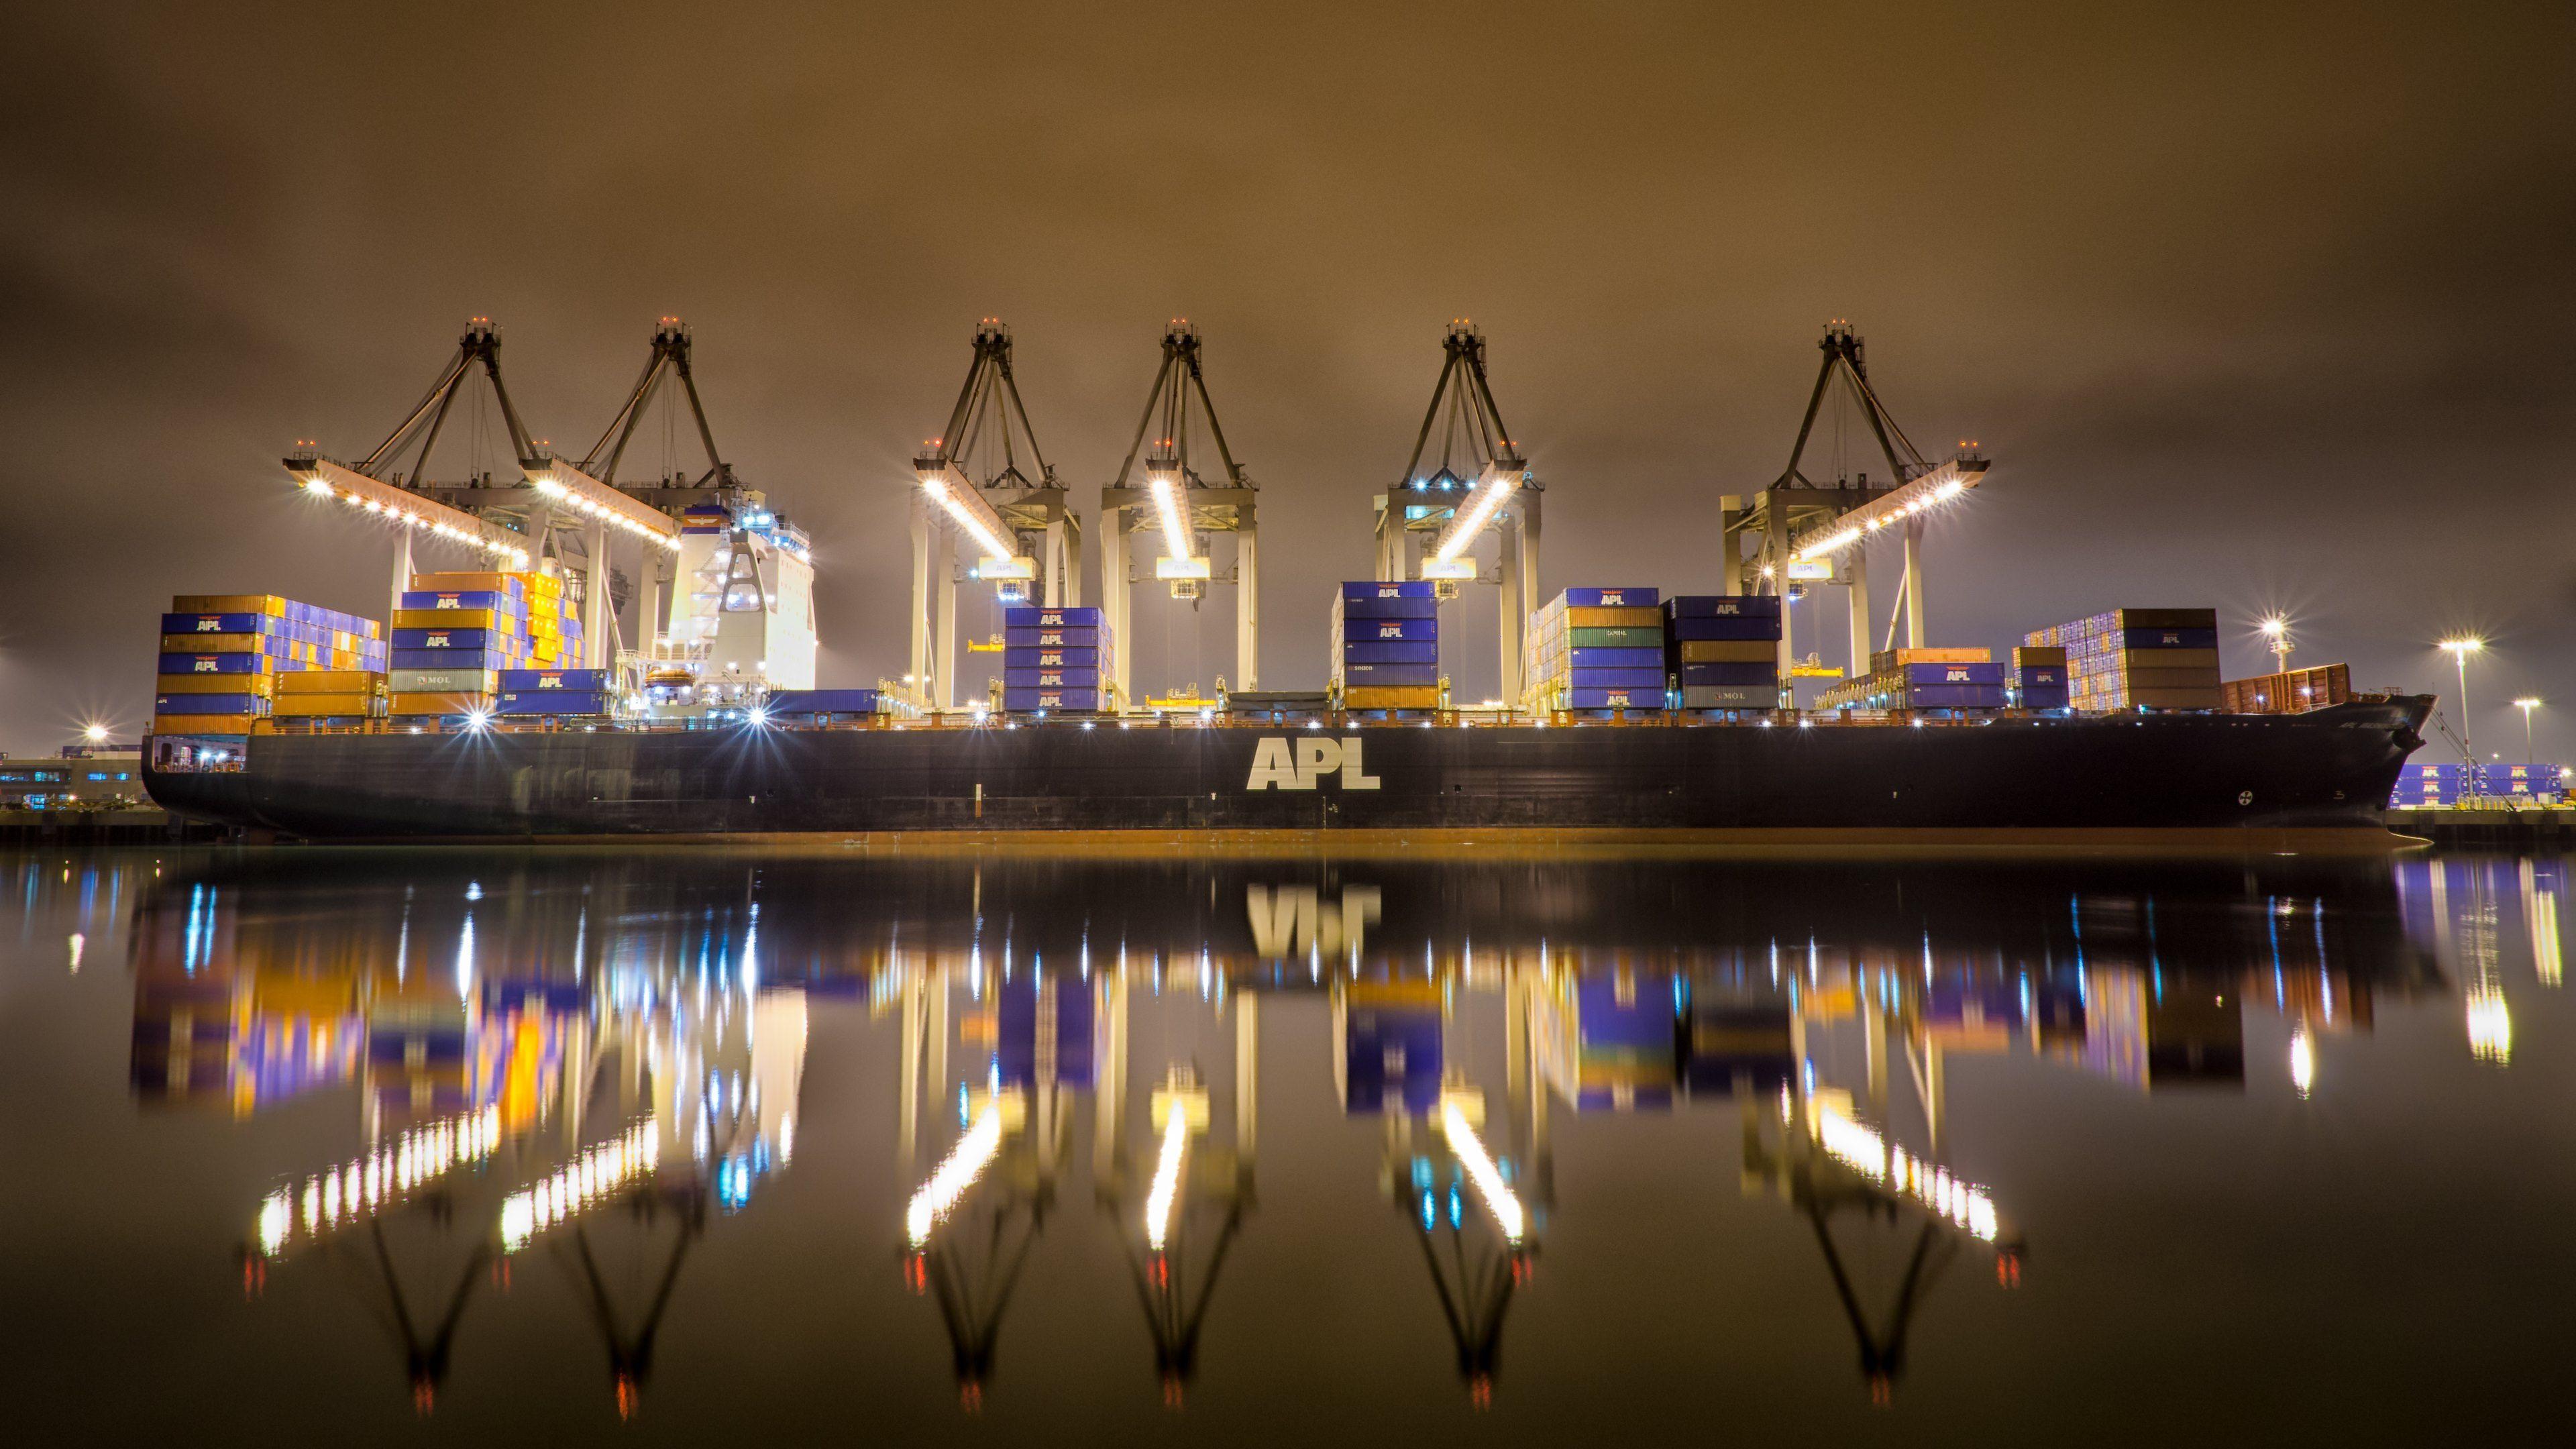 APL England Container Ship Wallpaper in HD, 4K and wide sizes